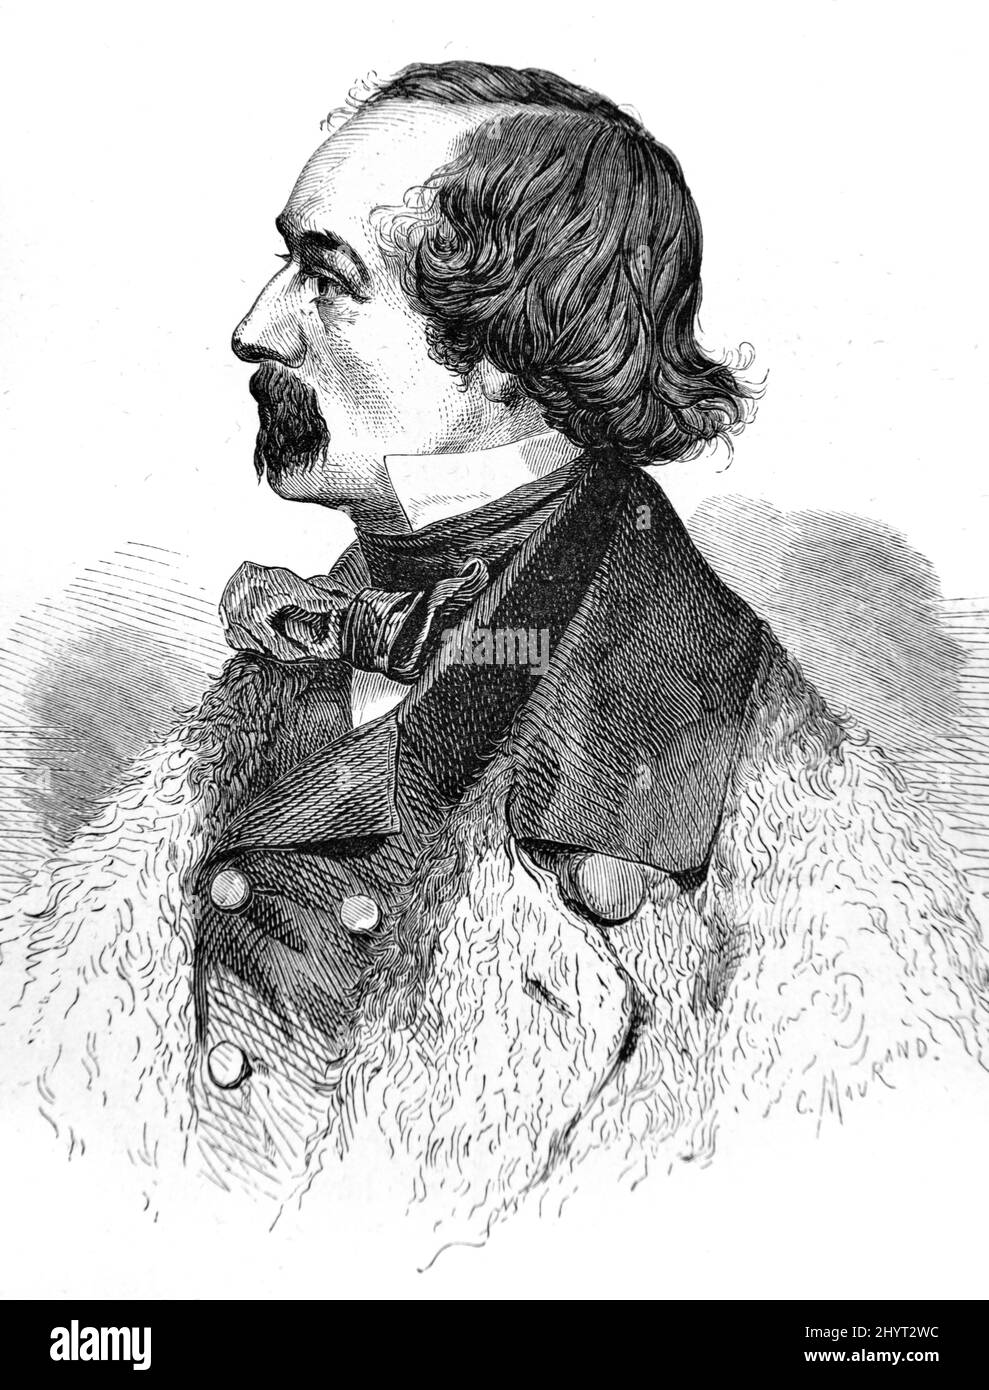 Portrait of Elisha Kent Kane (1820-1857) American Explorer and Medical Officer in United States Navy. Participant in two Grinnell Arctic Expeditions in search of Sir John Frankiln's Lost Expedition. Vintage Illustration or Engraving 1860. Stock Photo